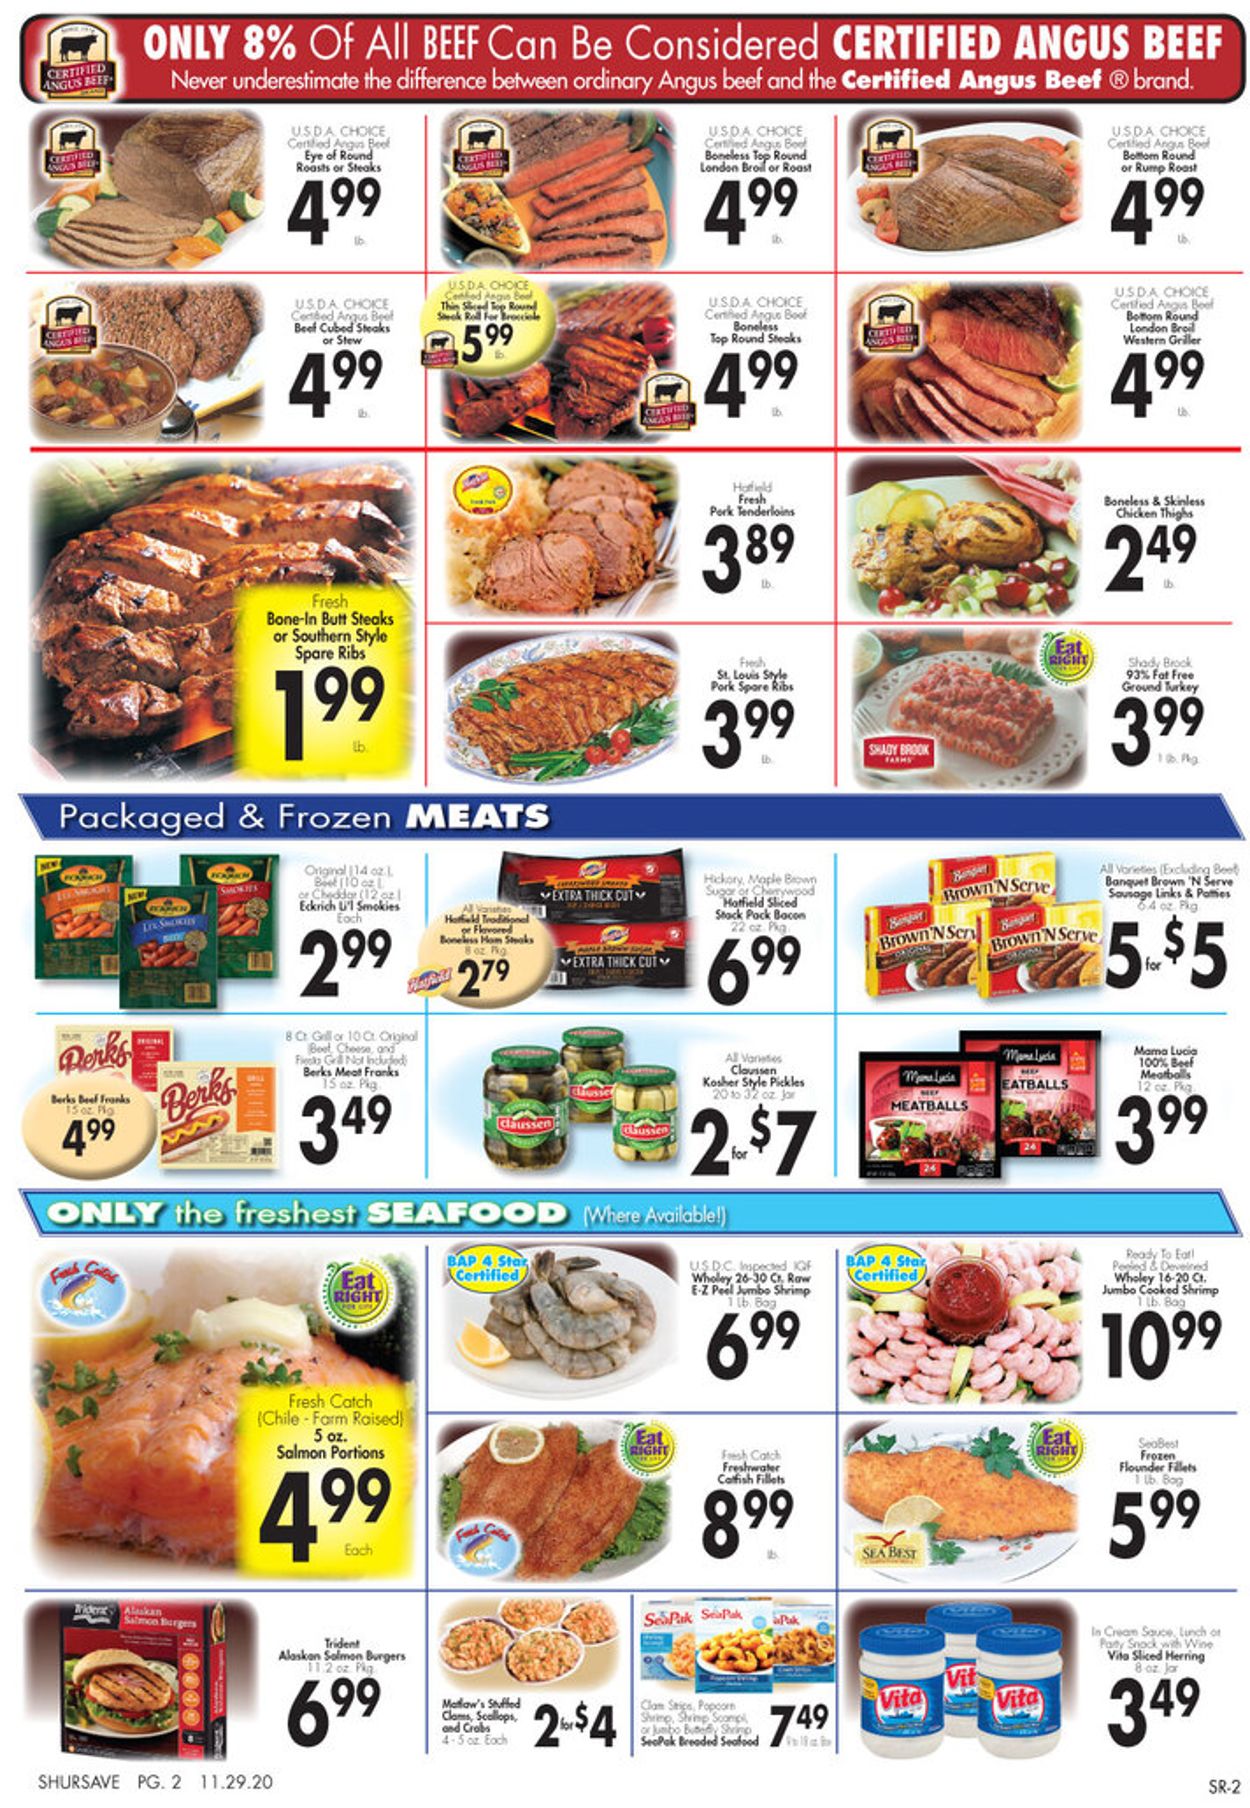 Gerrity's Supermarkets - Cyber Monday 2020 Weekly Ad Circular - valid 11/29-12/05/2020 (Page 7)